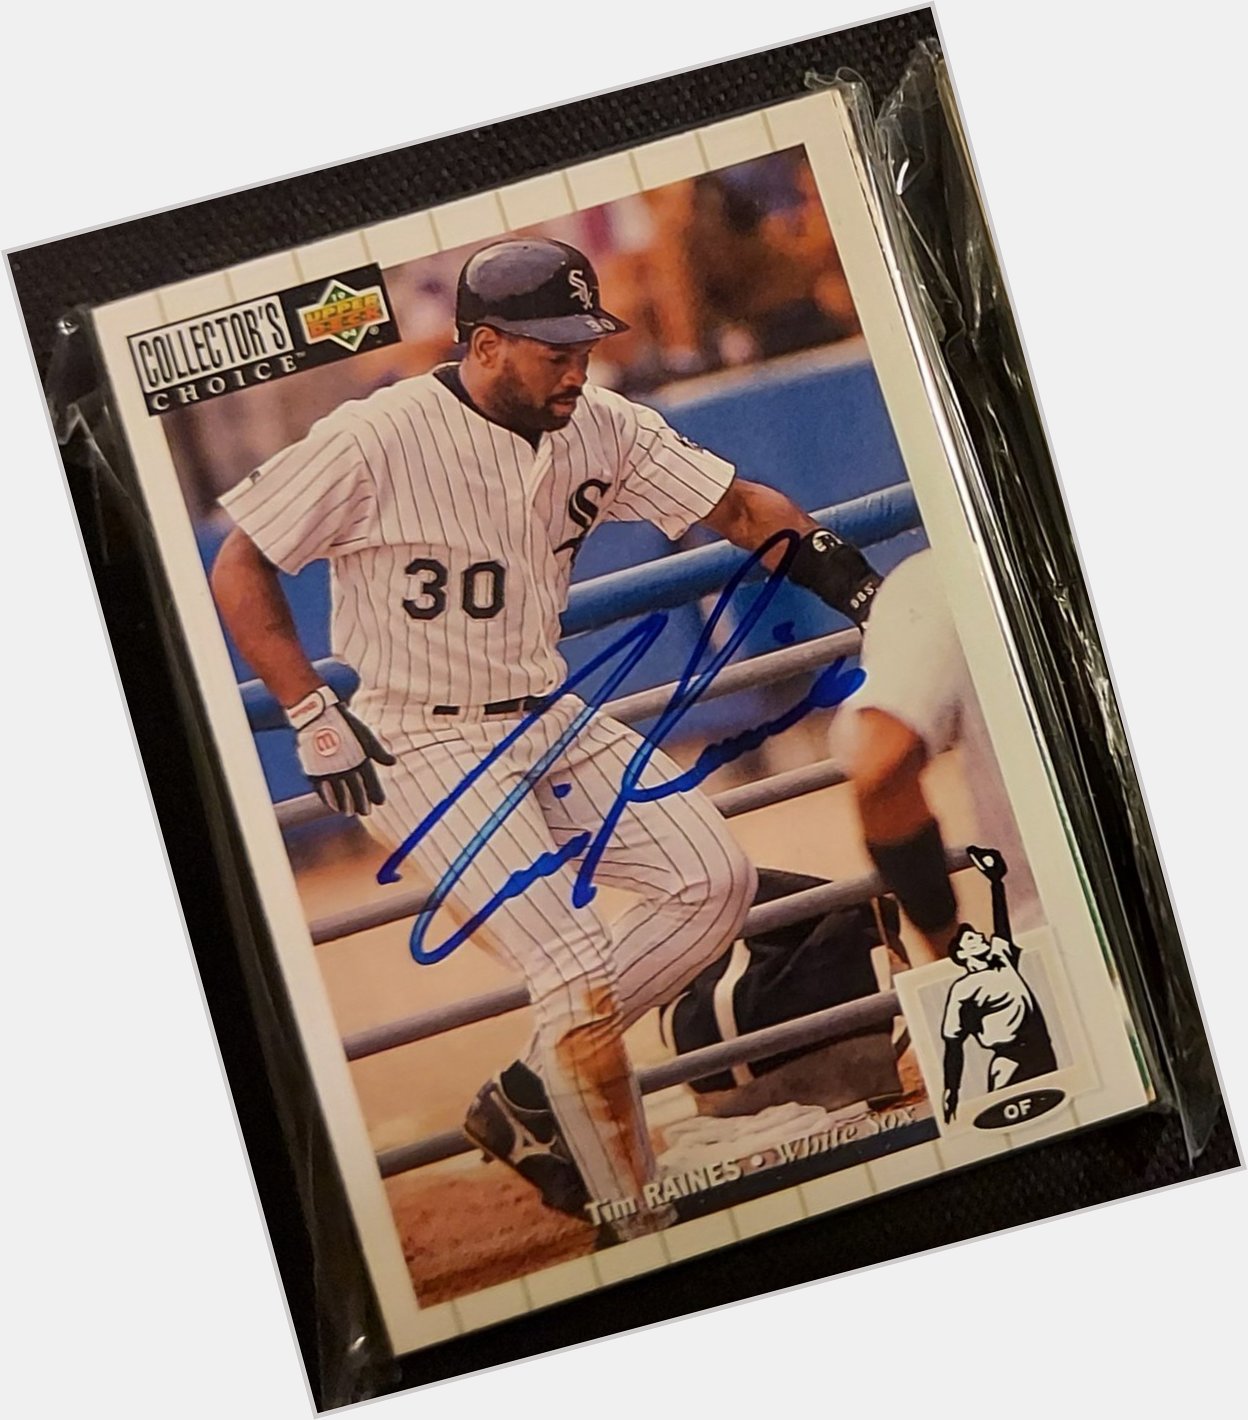 Happy birthday, Tim Raines.
(Recent inclusion in a pack from 